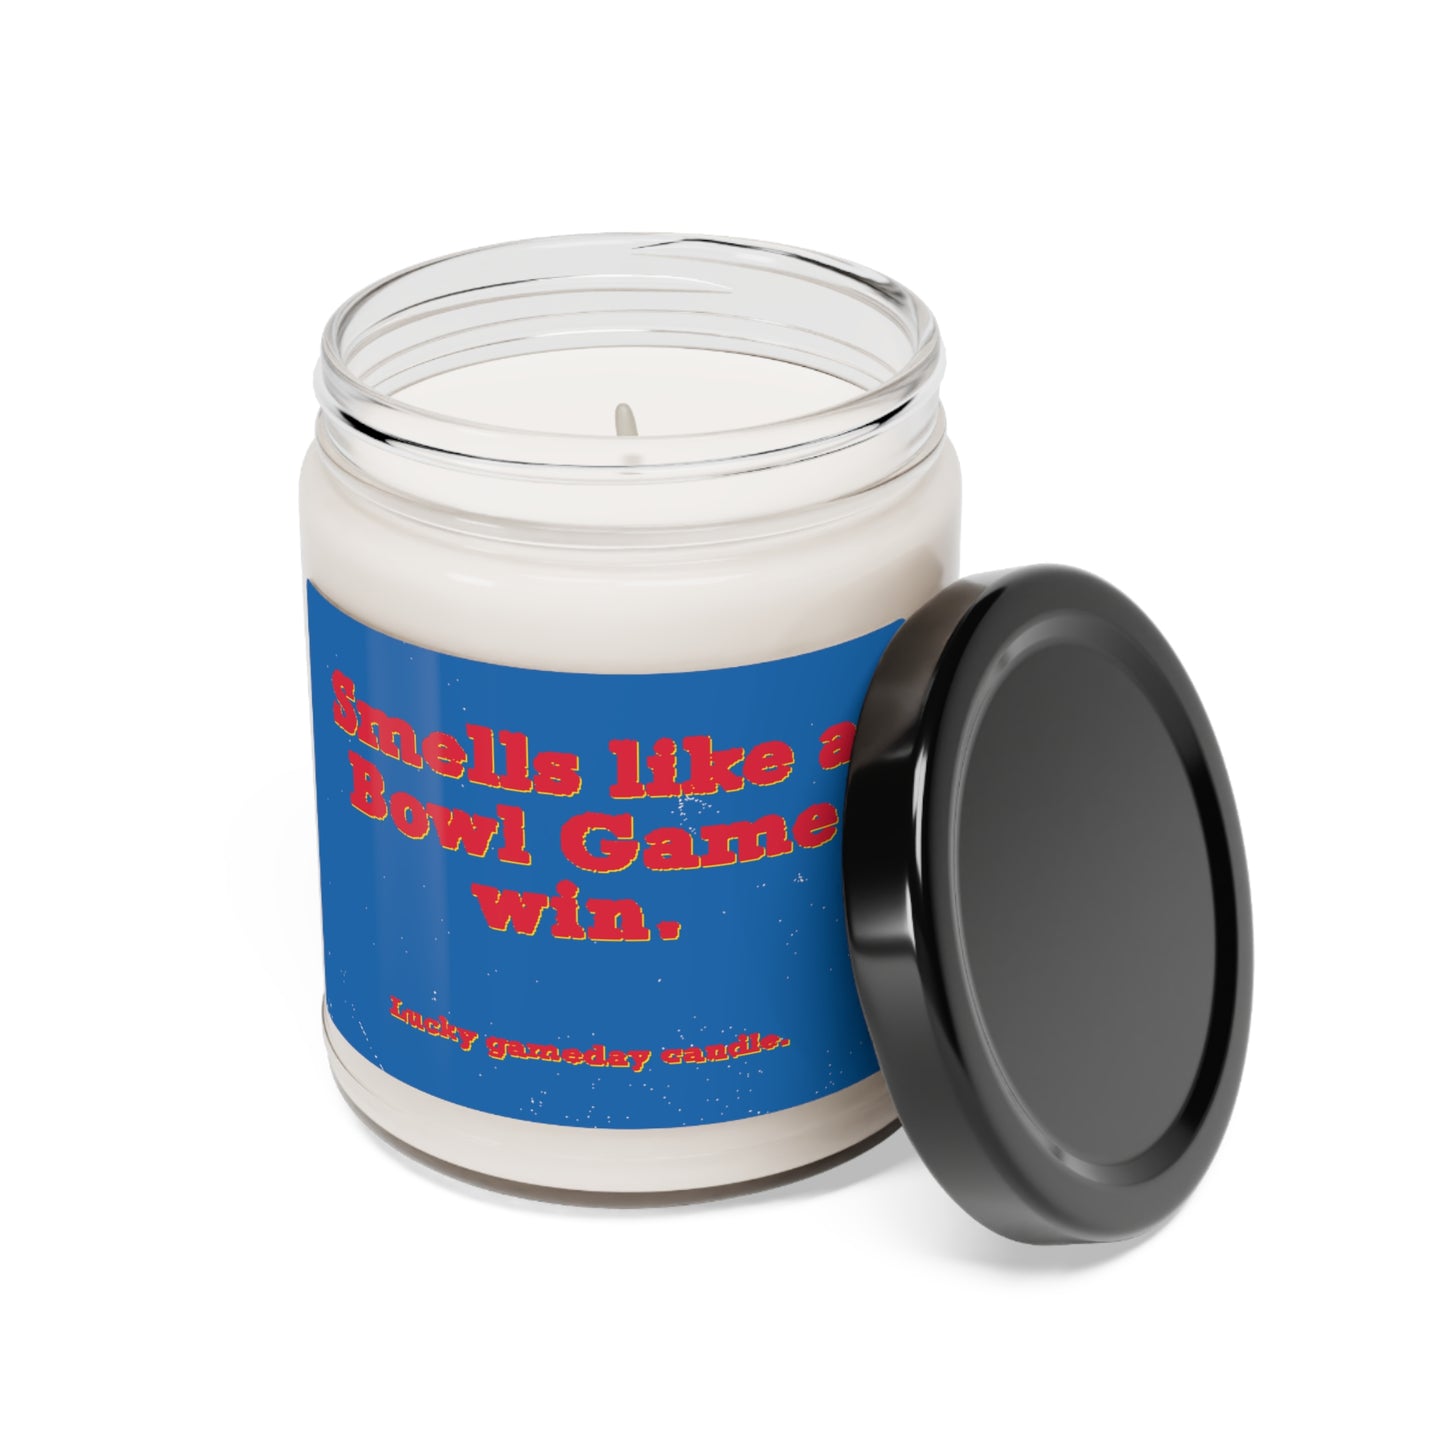 Kansas - "Smells Like a Bowl Game Win" Scented Candle